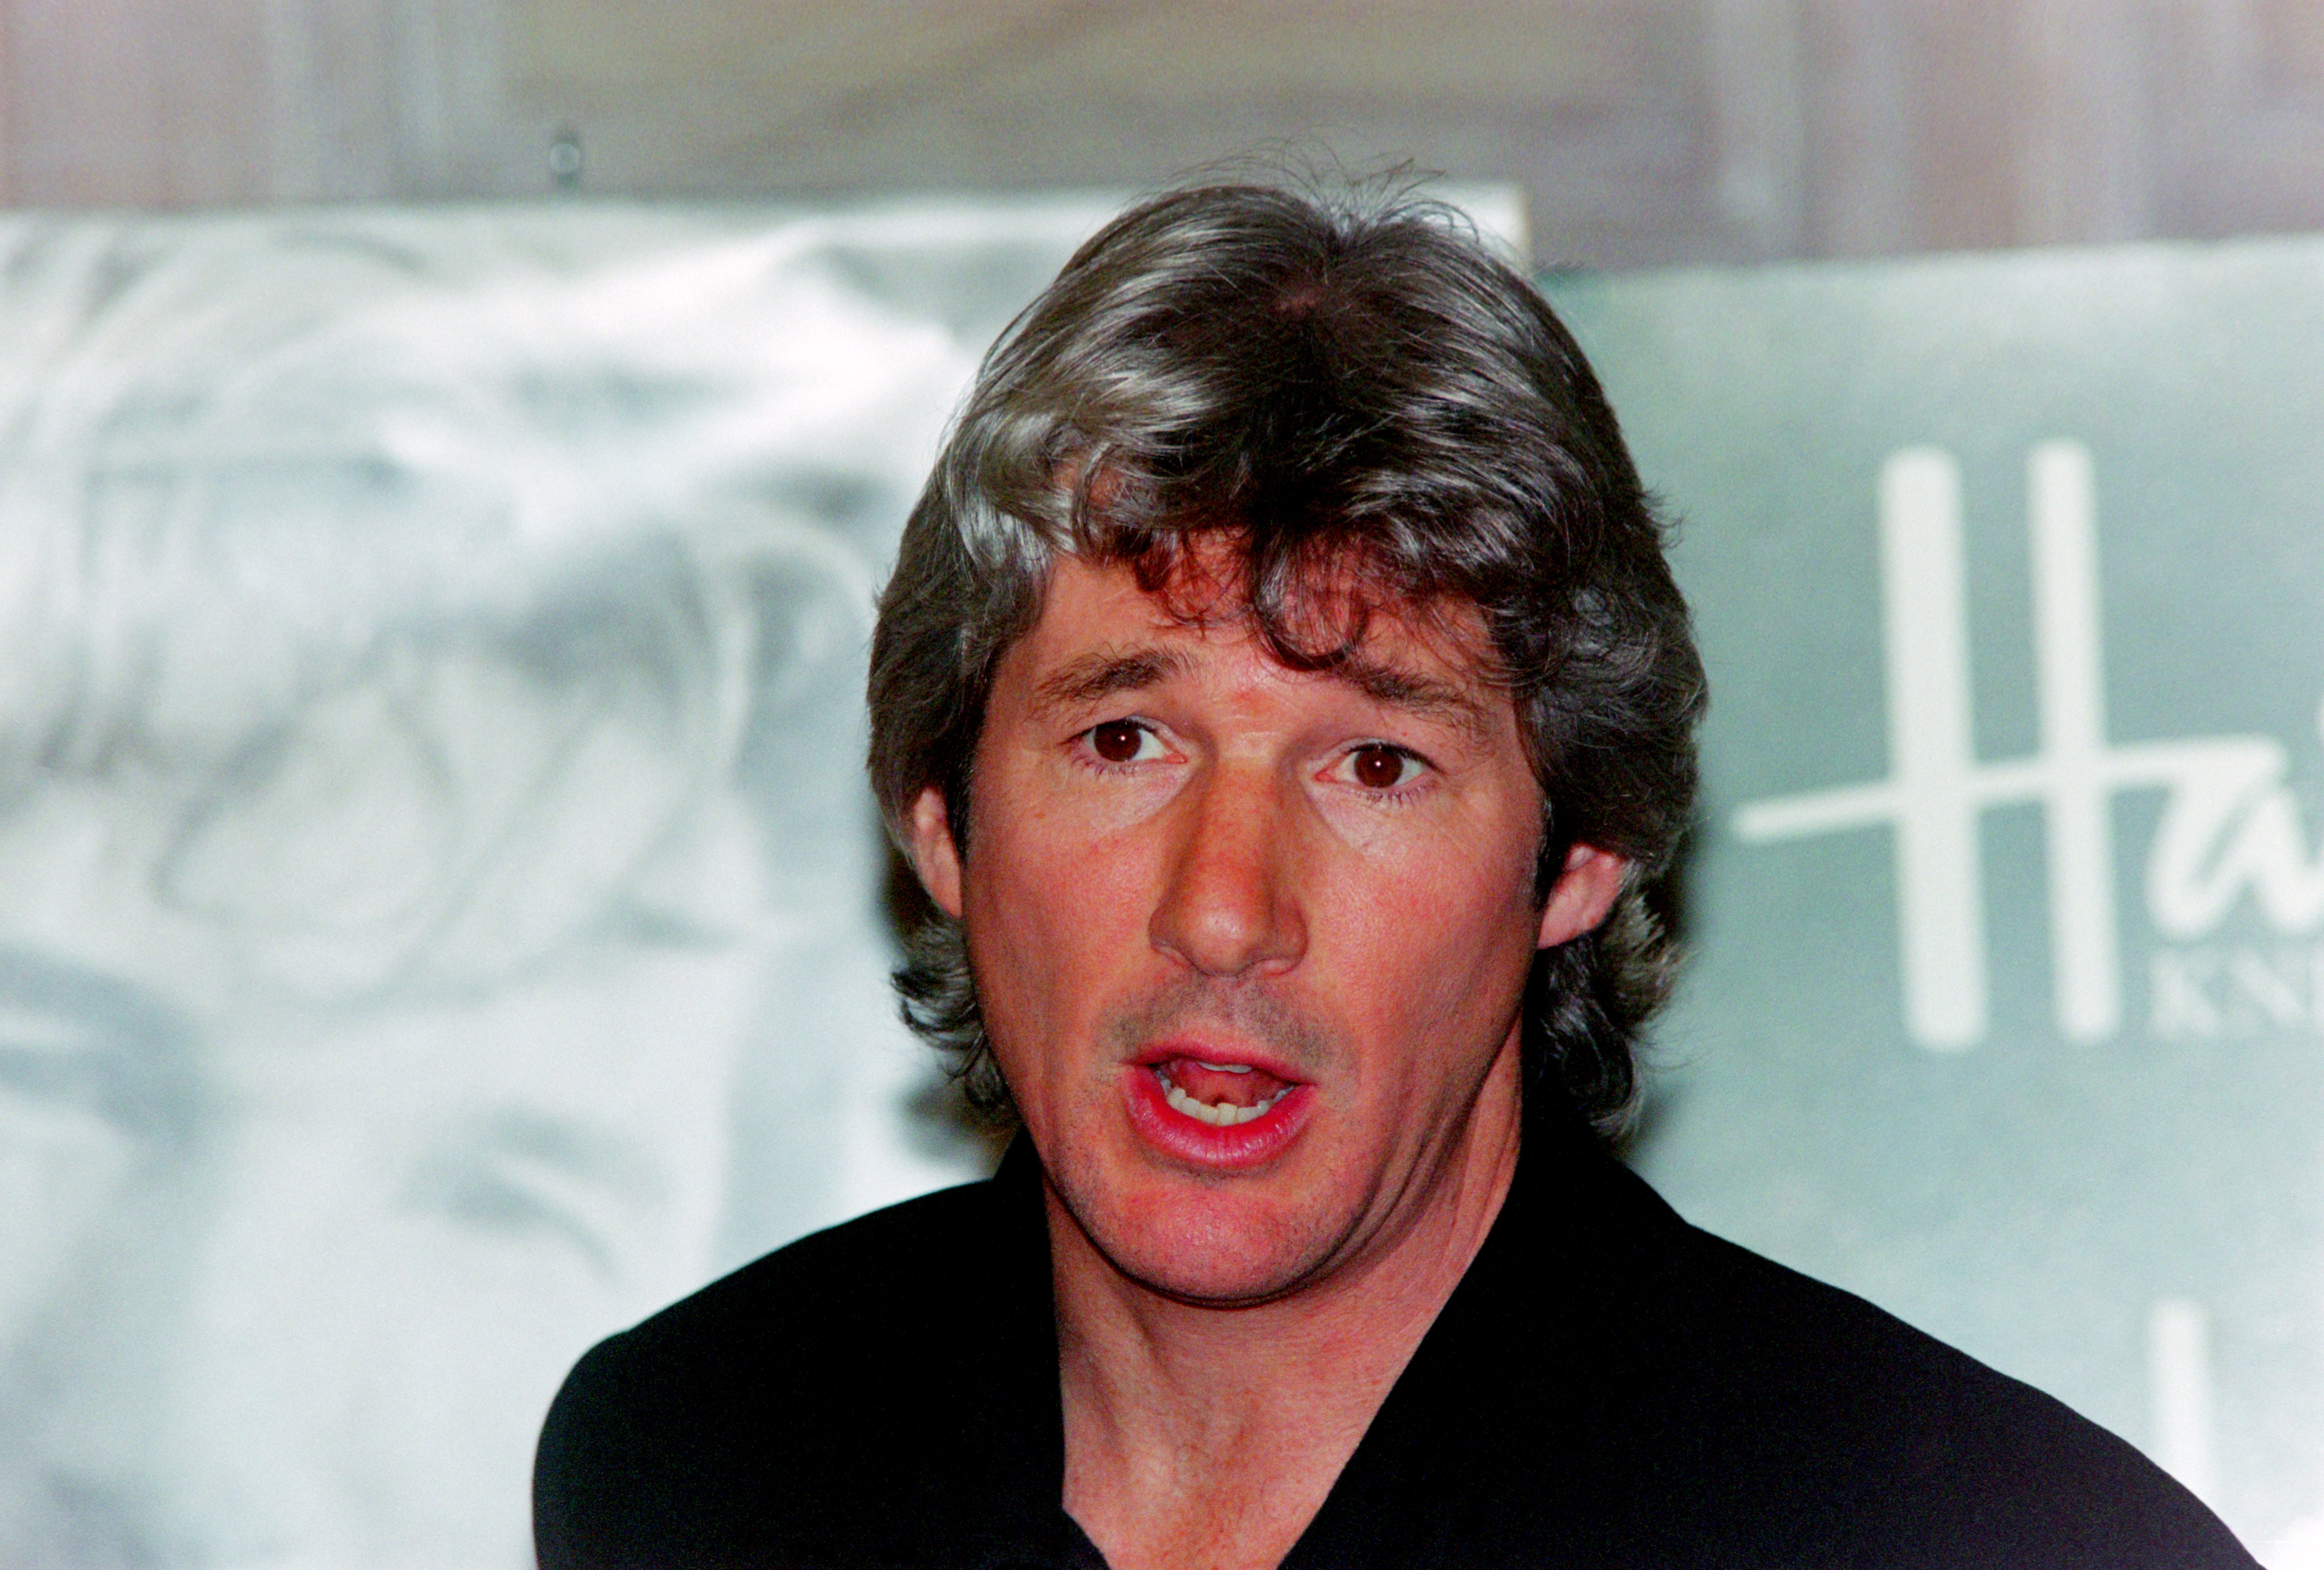 Richard Gere Image Source: Getty Images.